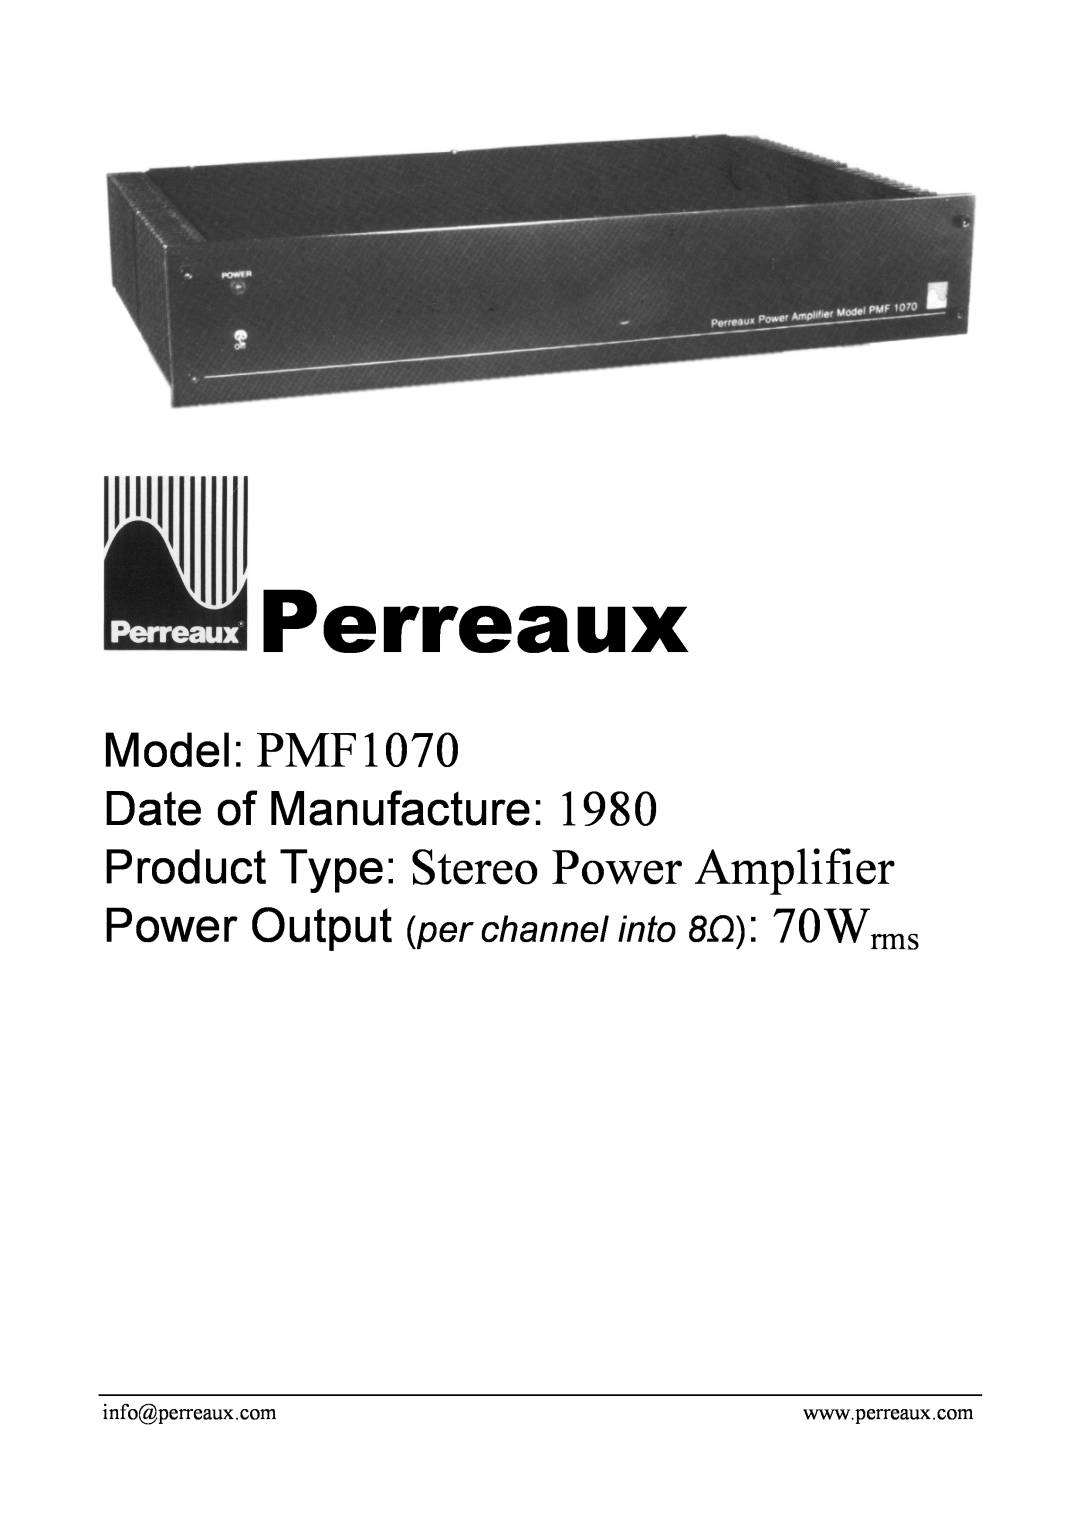 Perreaux manual Perreaux, Product Type Stereo Power Amplifier, Model PMF1070 Date of Manufacture 